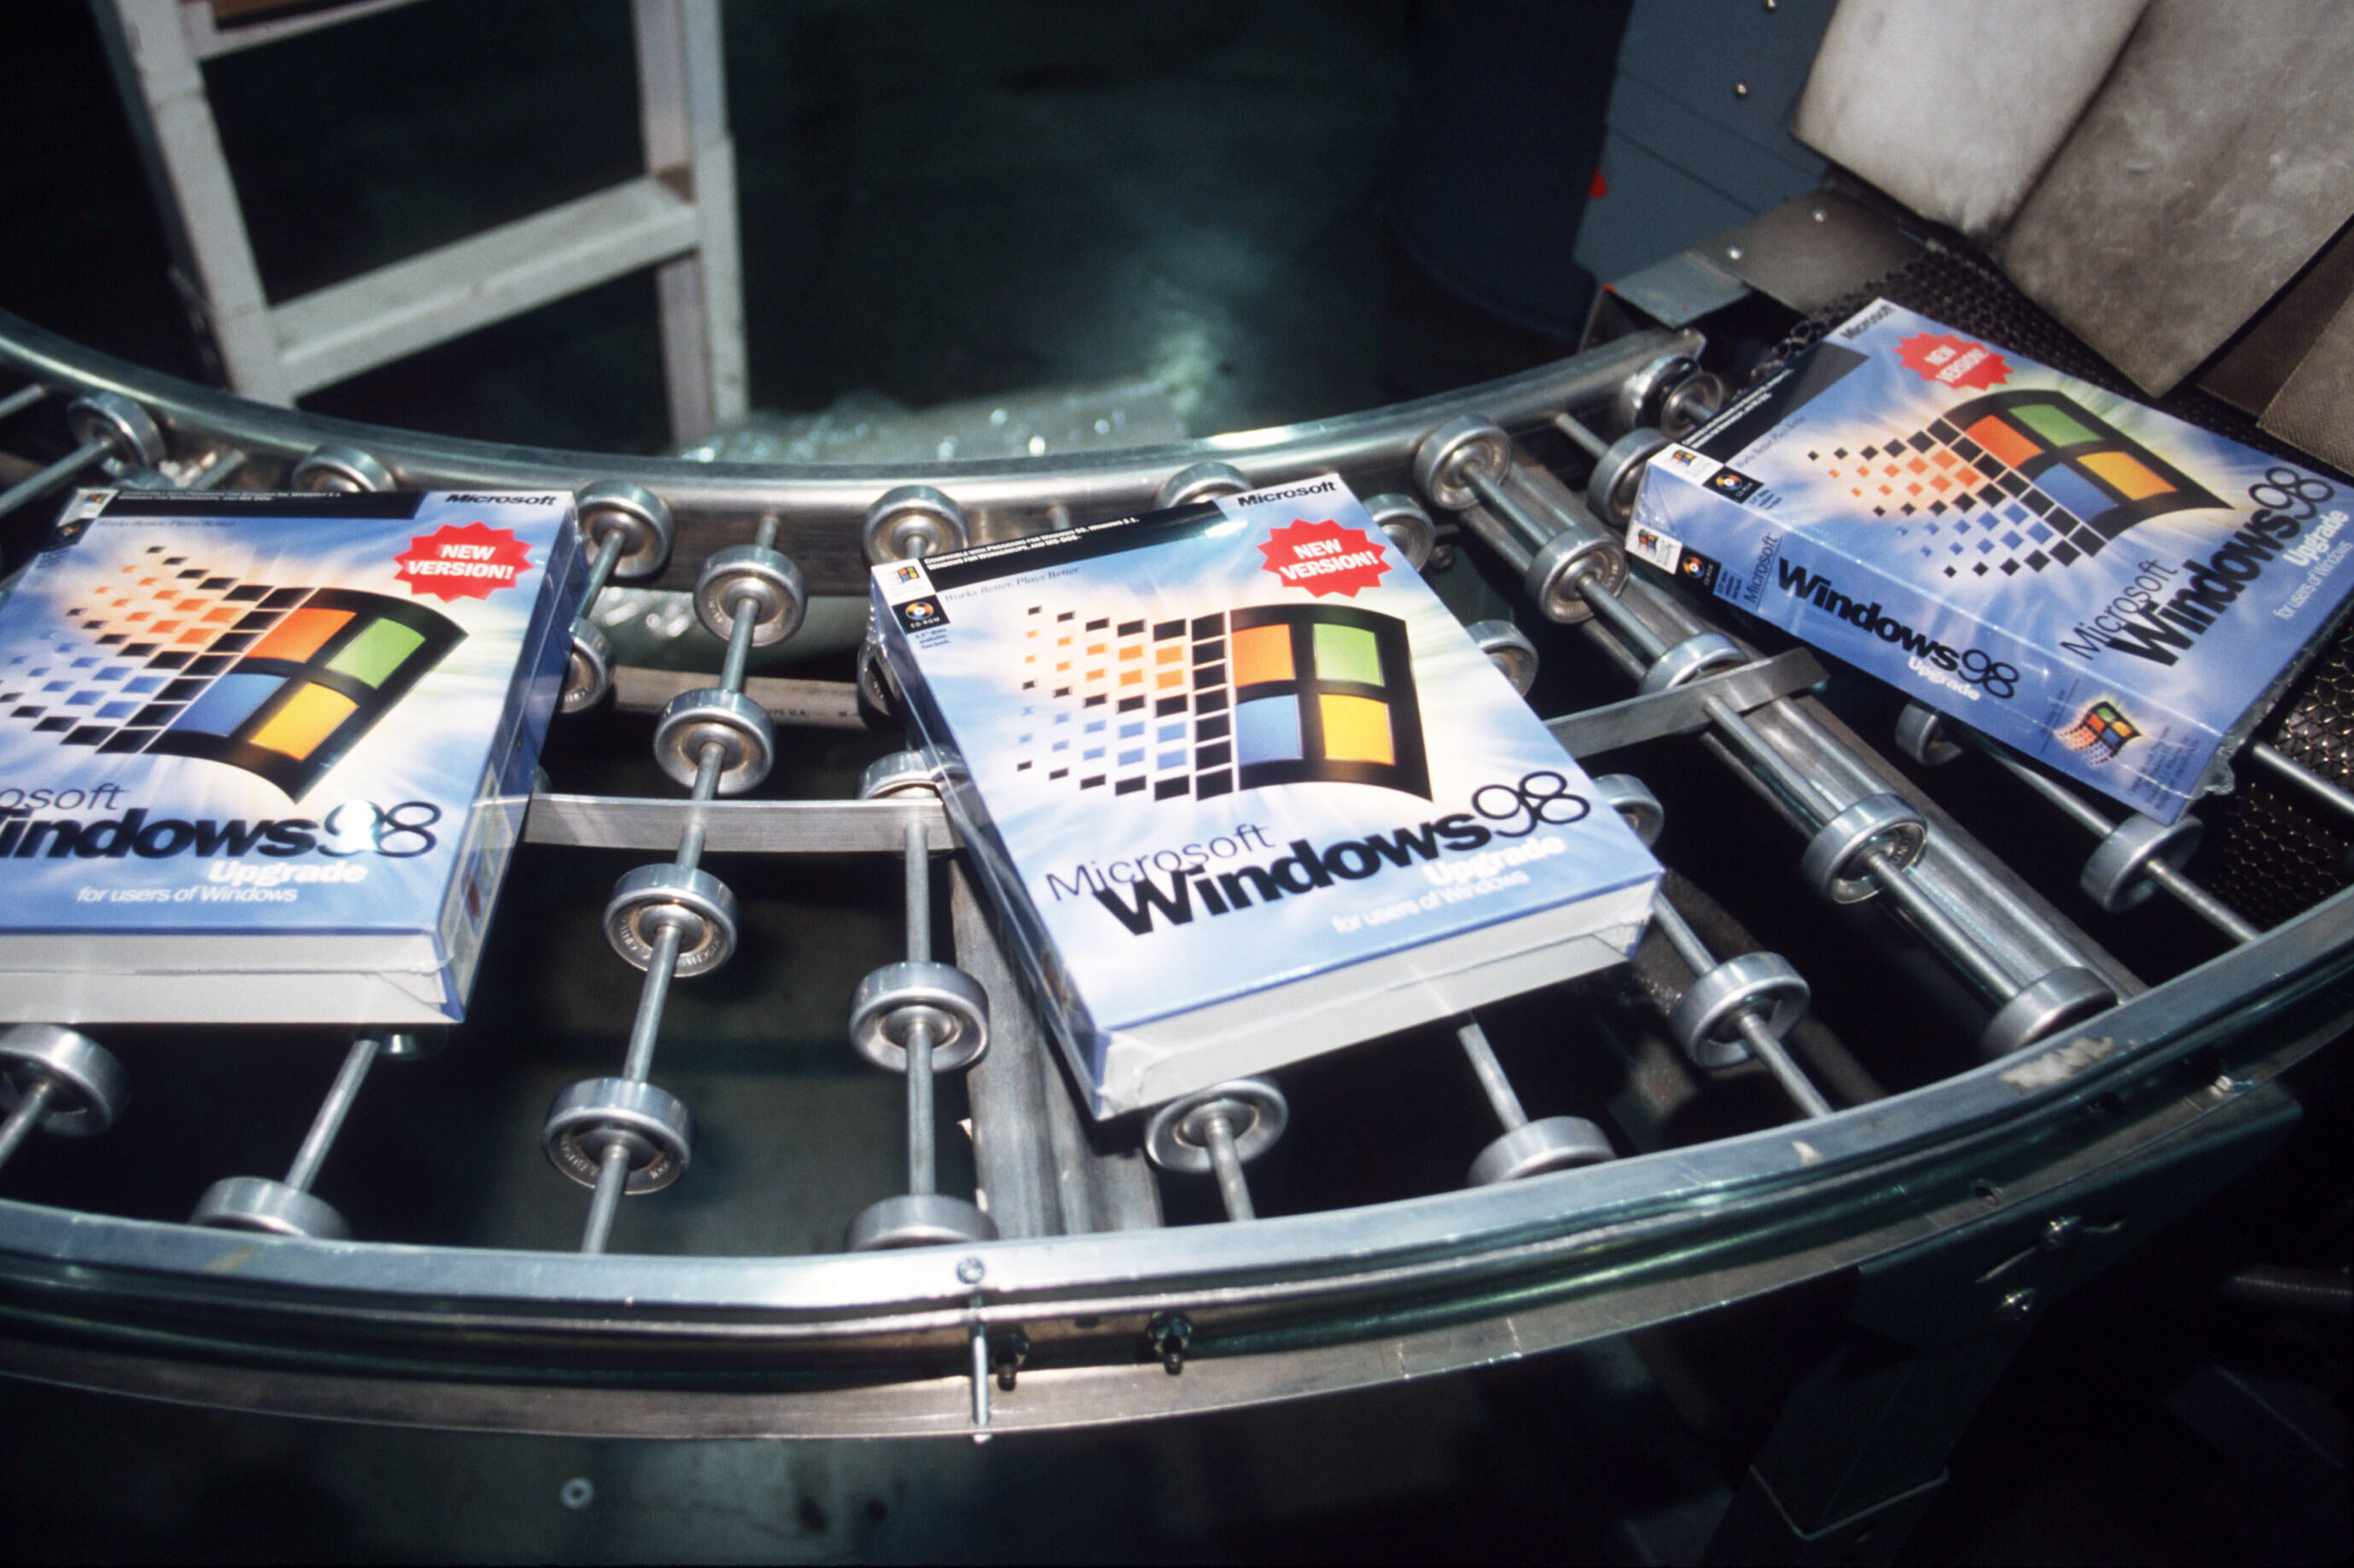 Windows 98 software packages sit on an assembly line June 24, 1998 in Bothell, WA.